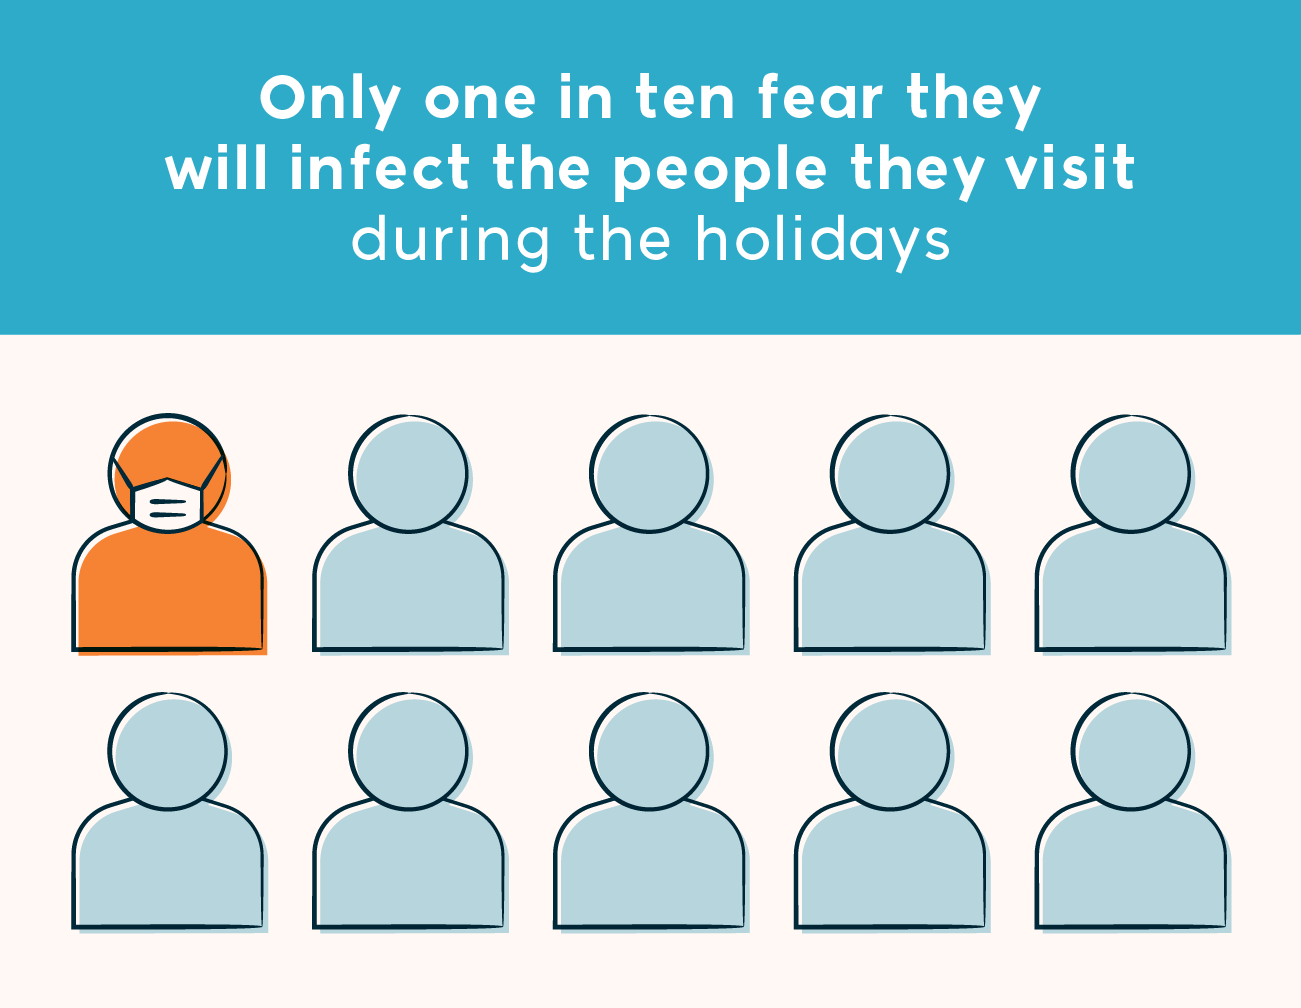 only one in ten fear they will infect the people they visit during the holidays